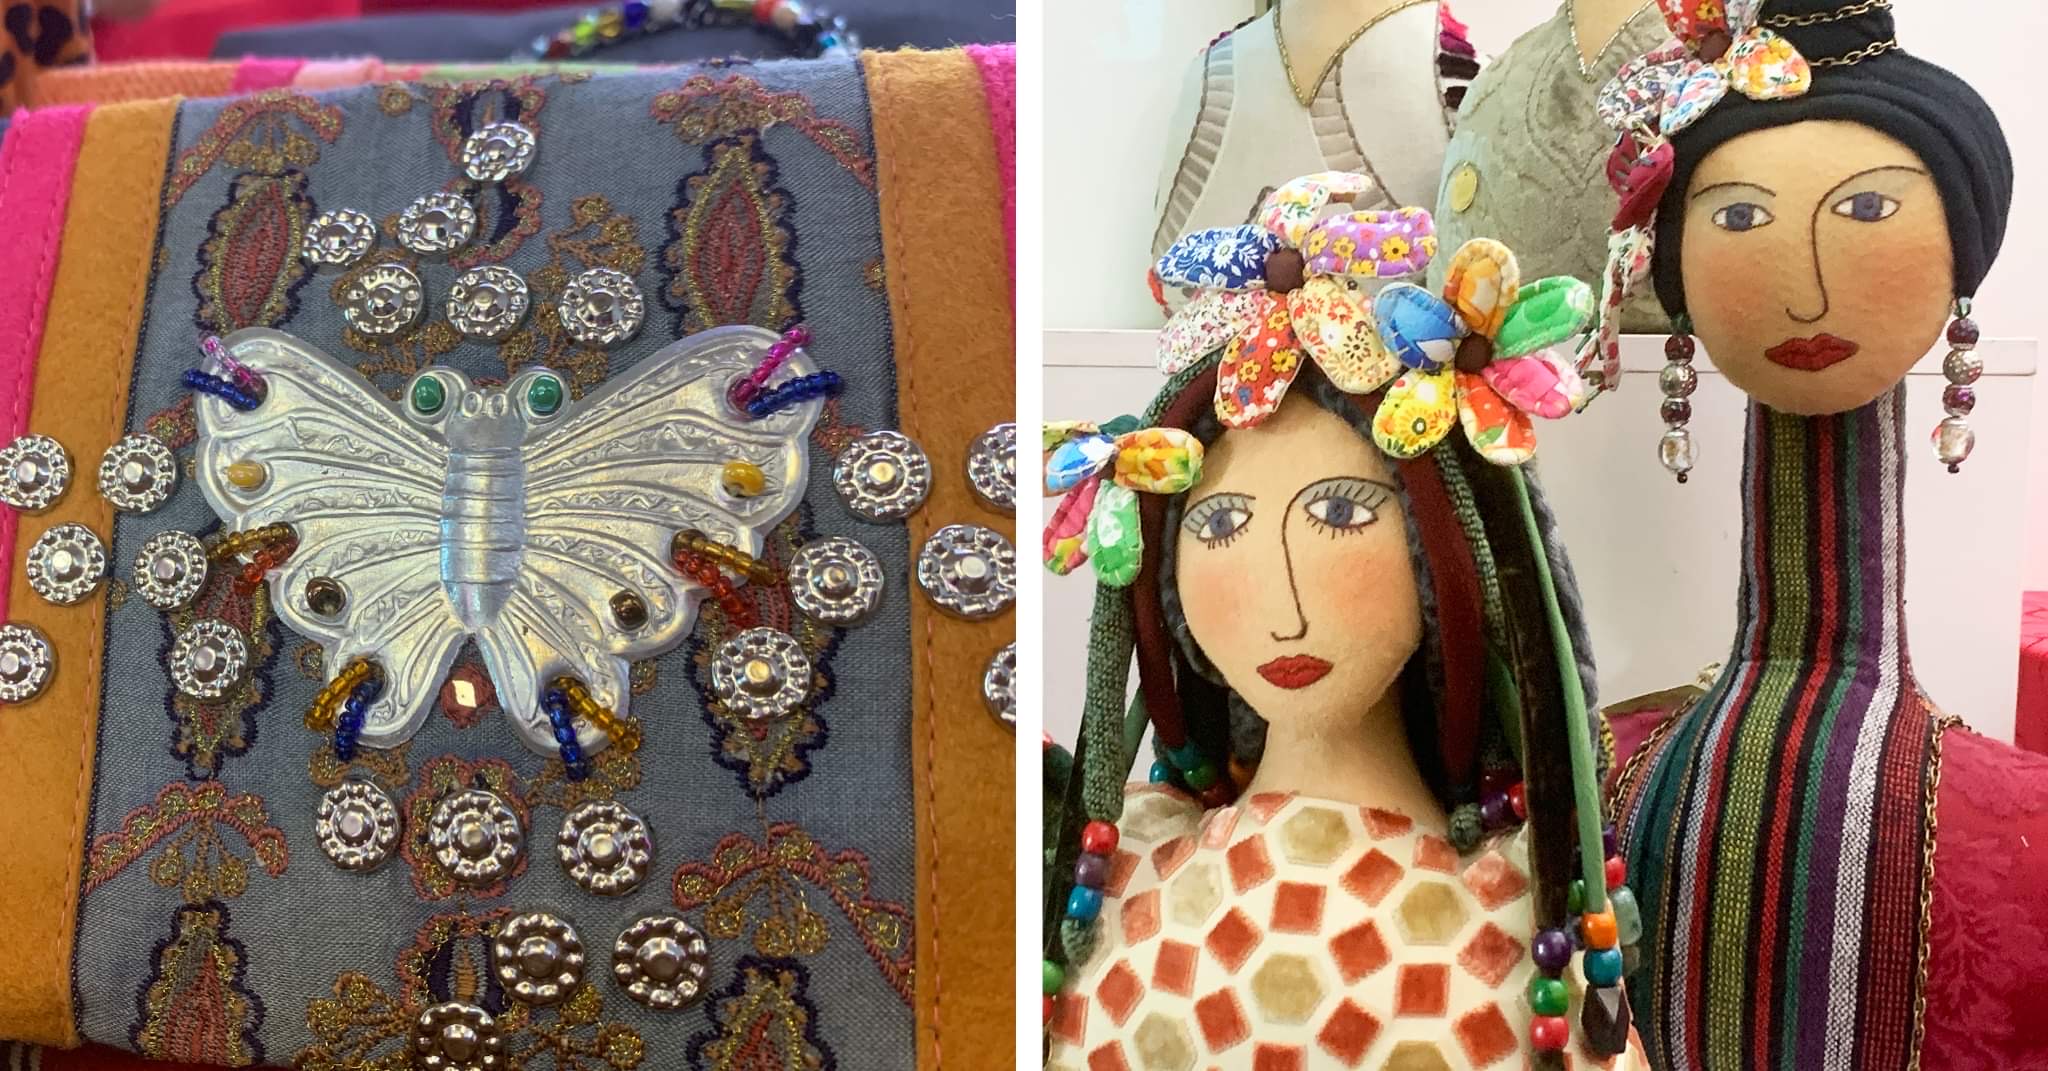 Daughters turn mother’s classic artisanal pieces turns into a legacy